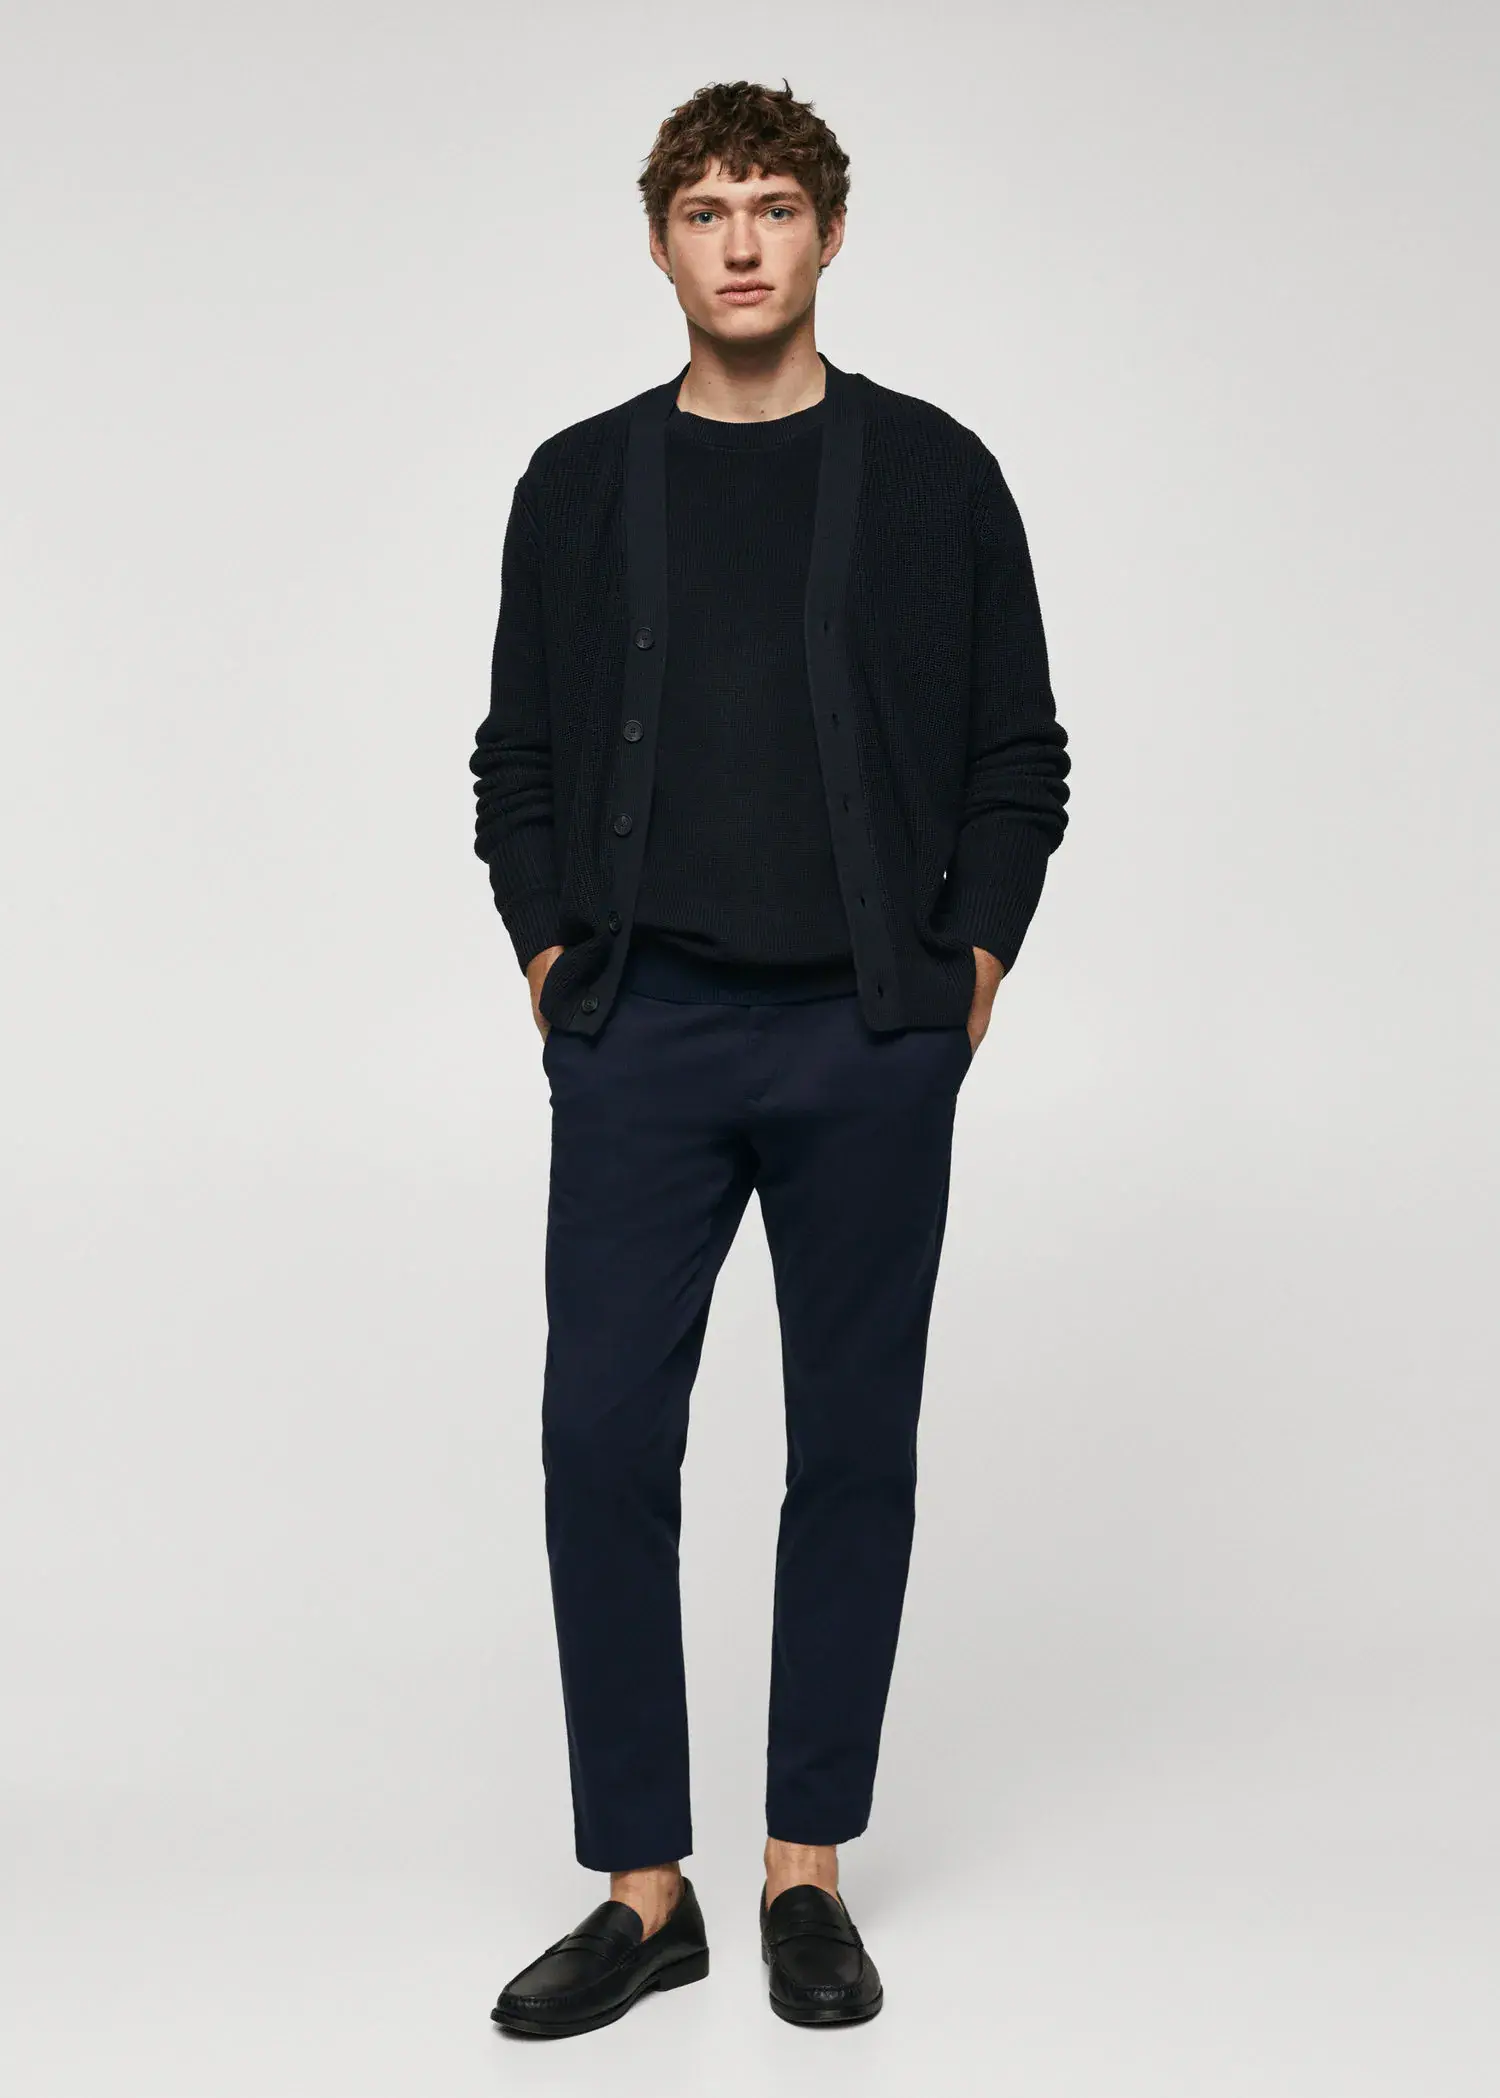 Mango Cotton tapered crop pants. a man wearing a black sweater and black pants. 